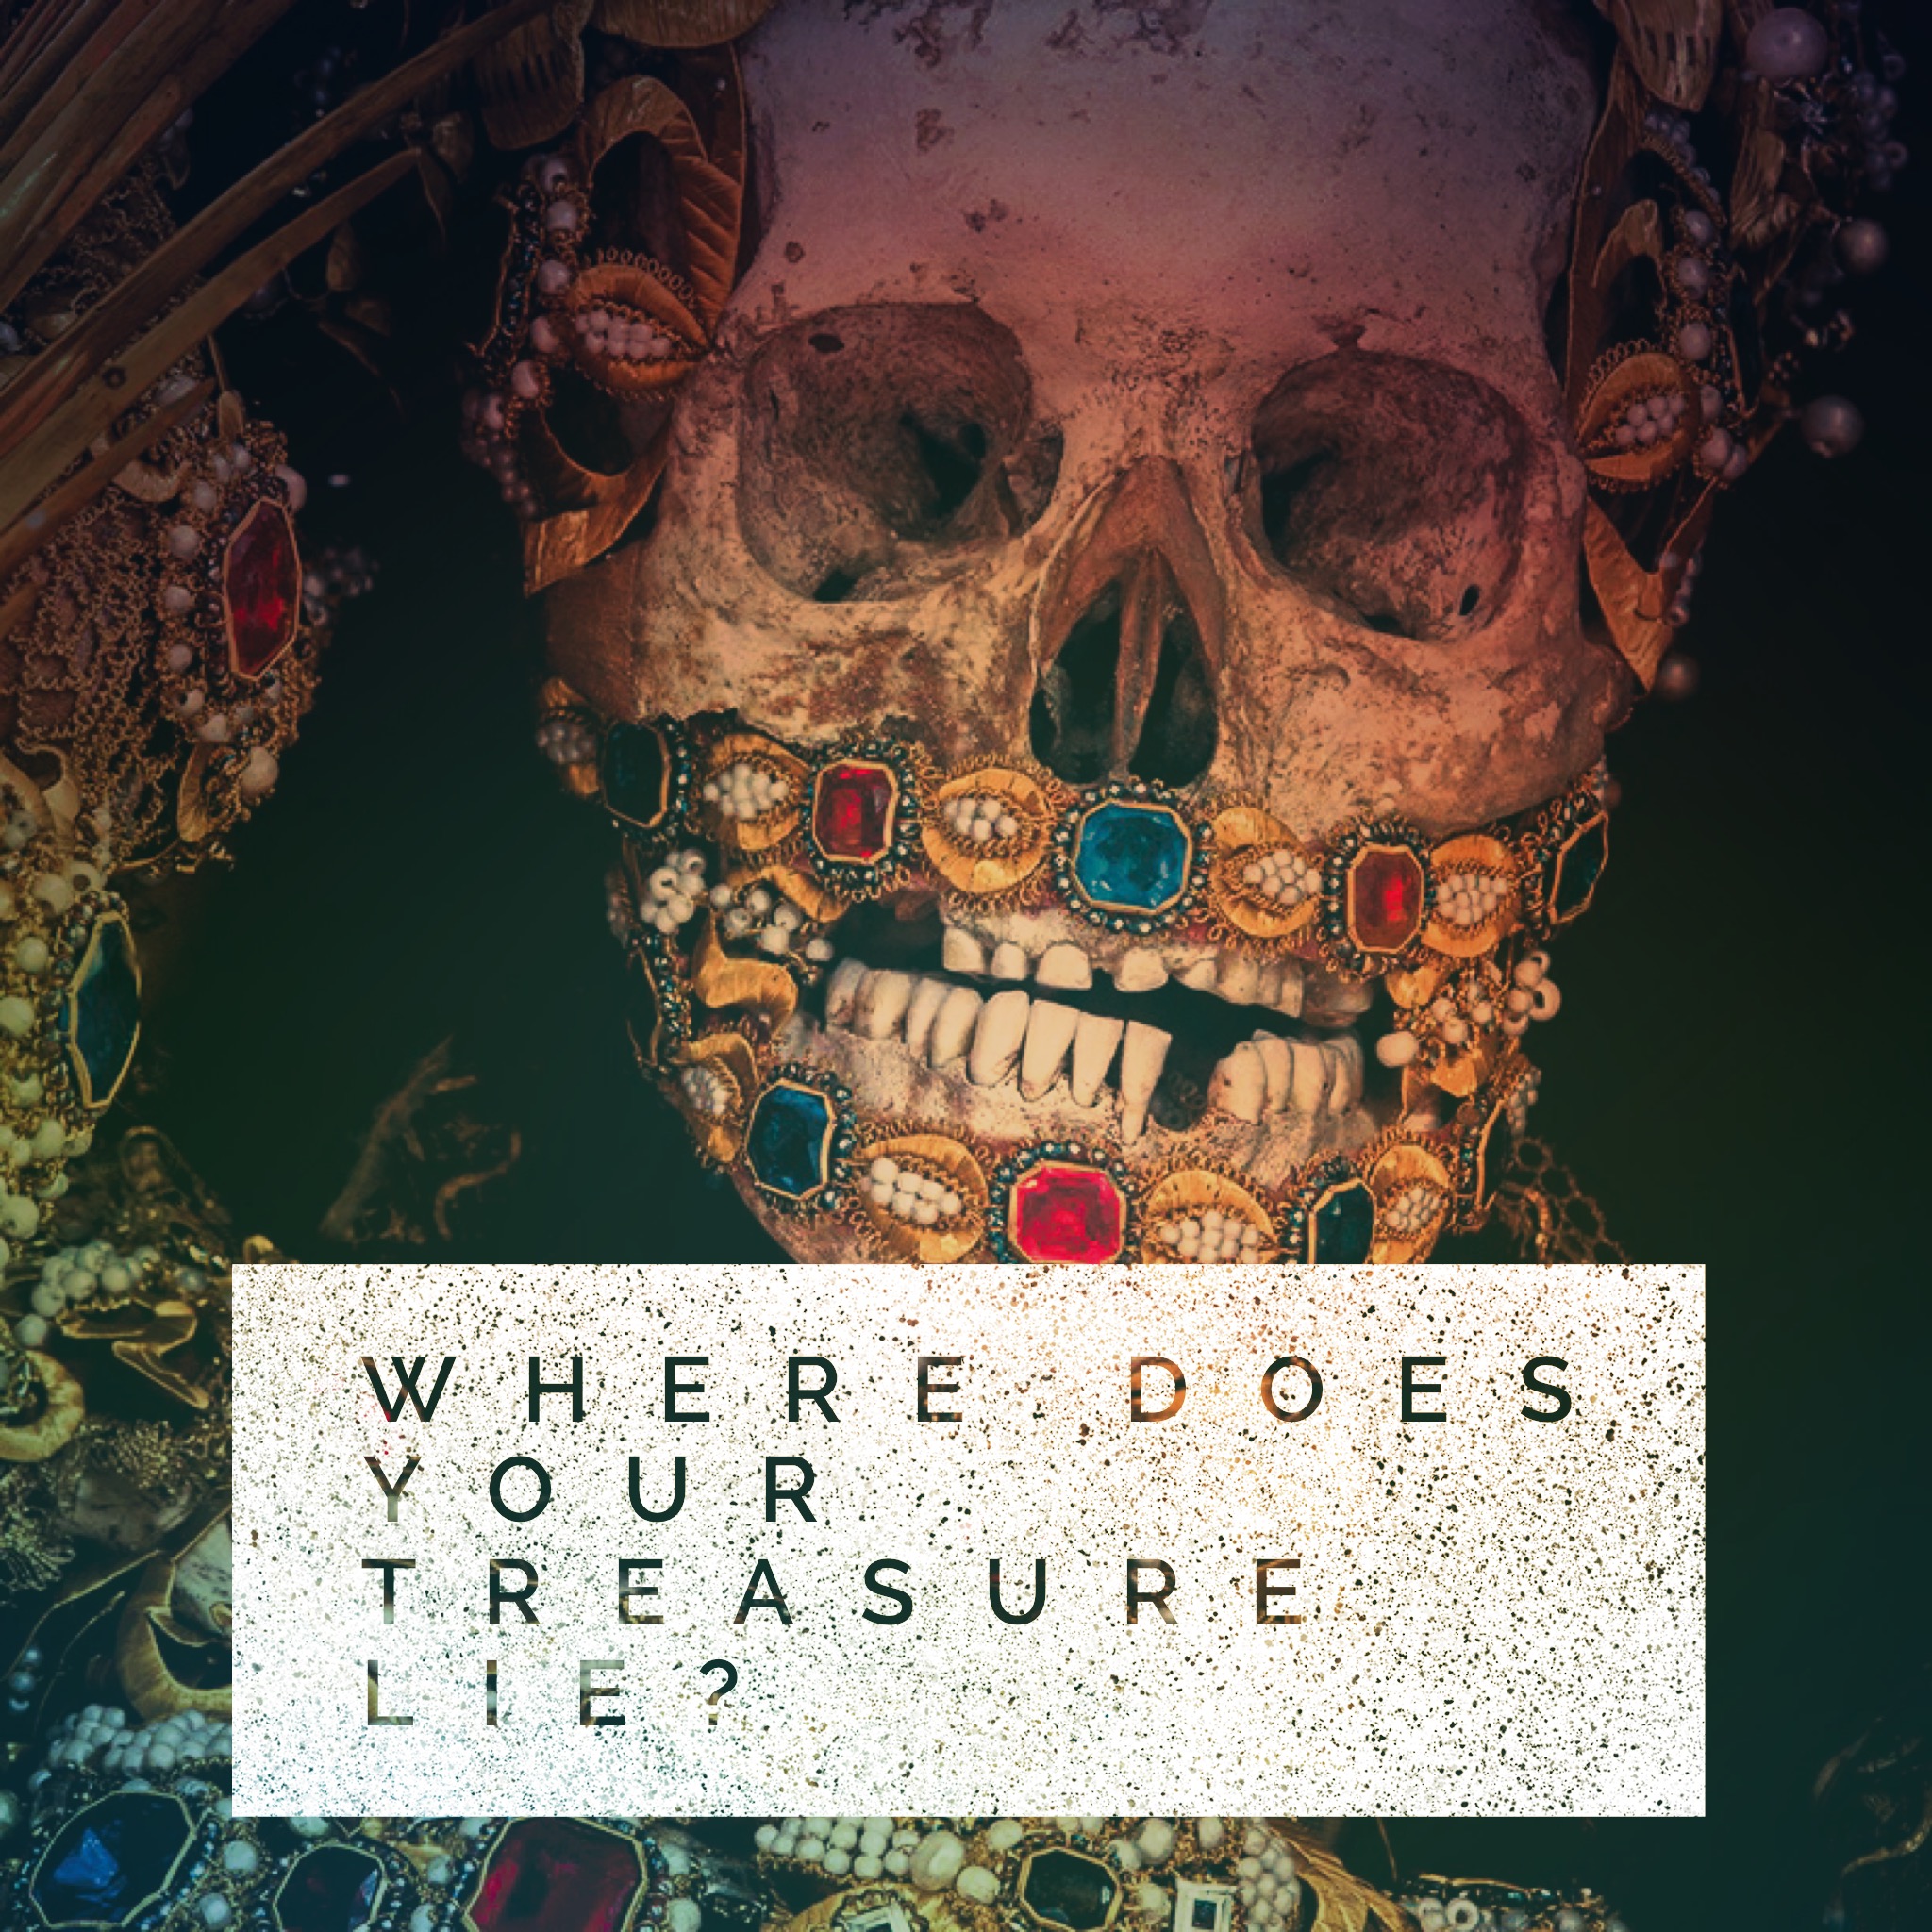 Where does your treasure lie?